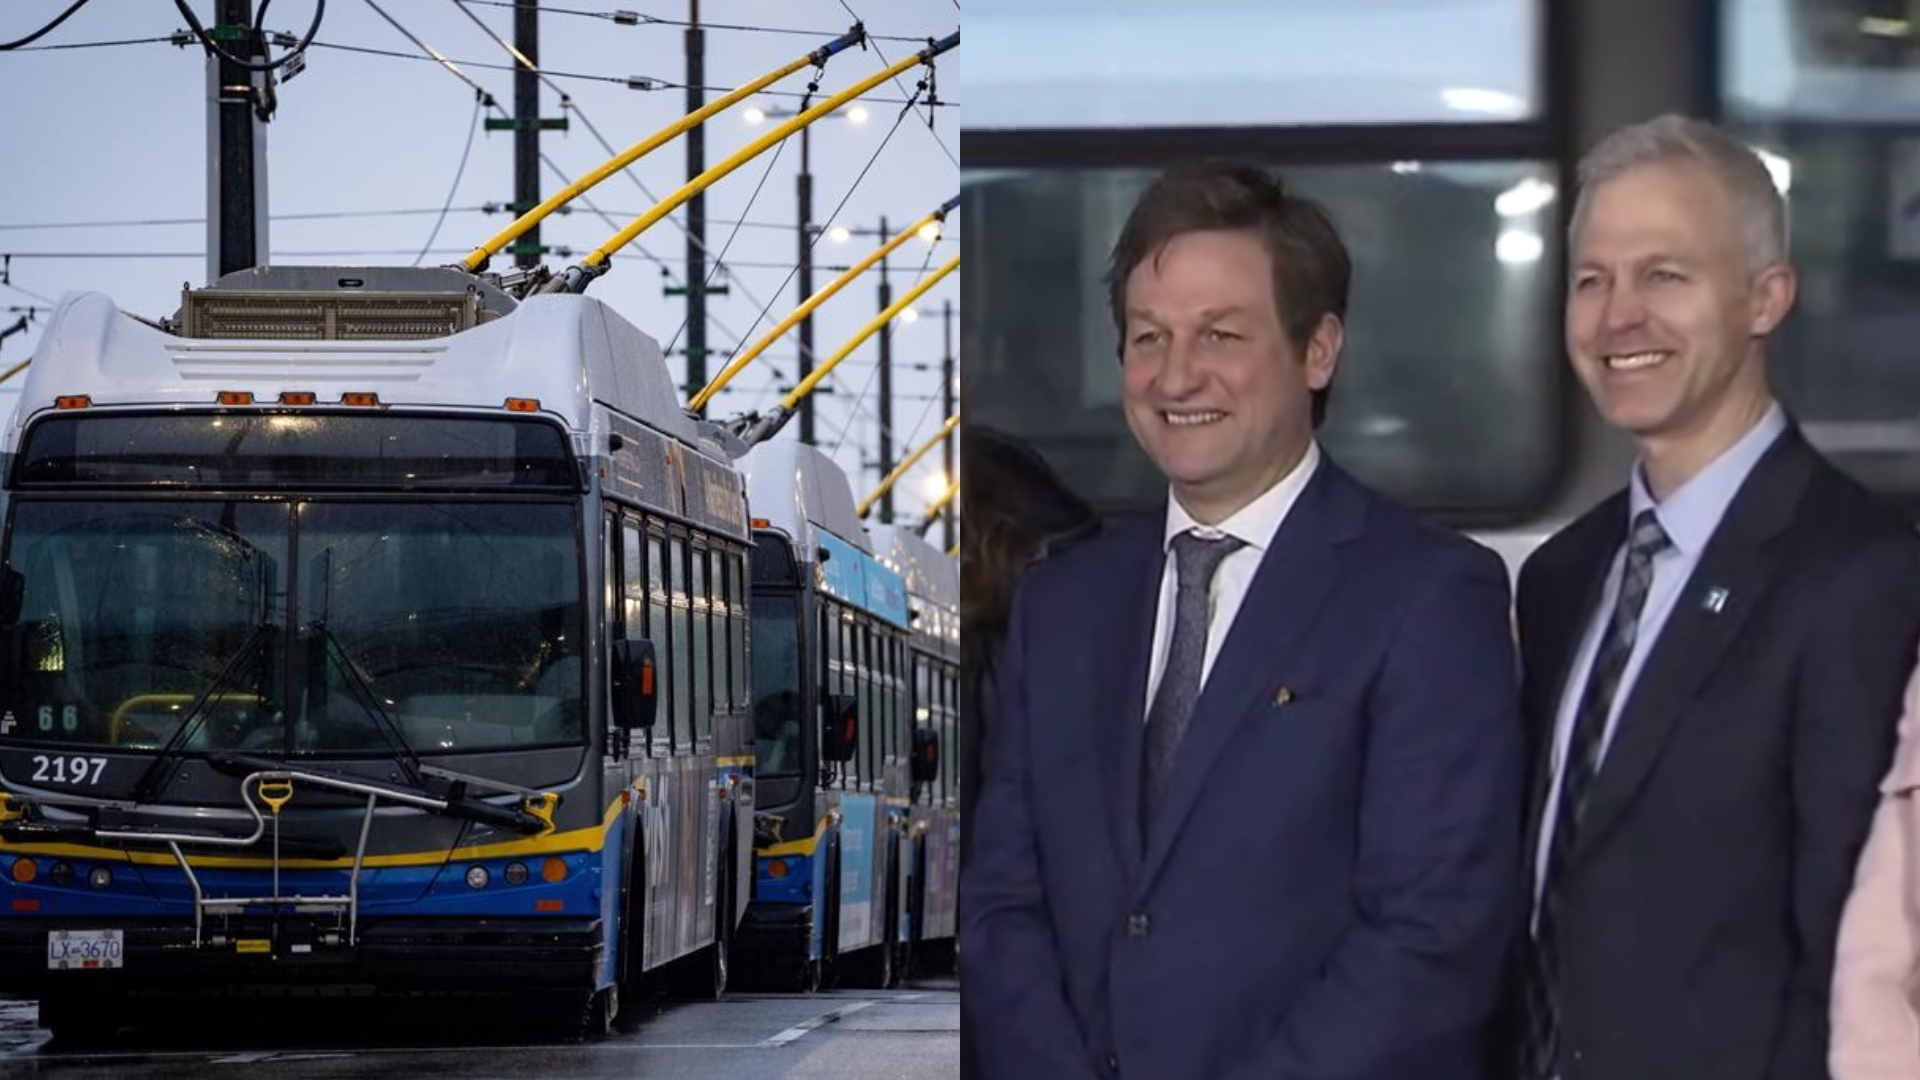 B.C. government giving TransLink $300M